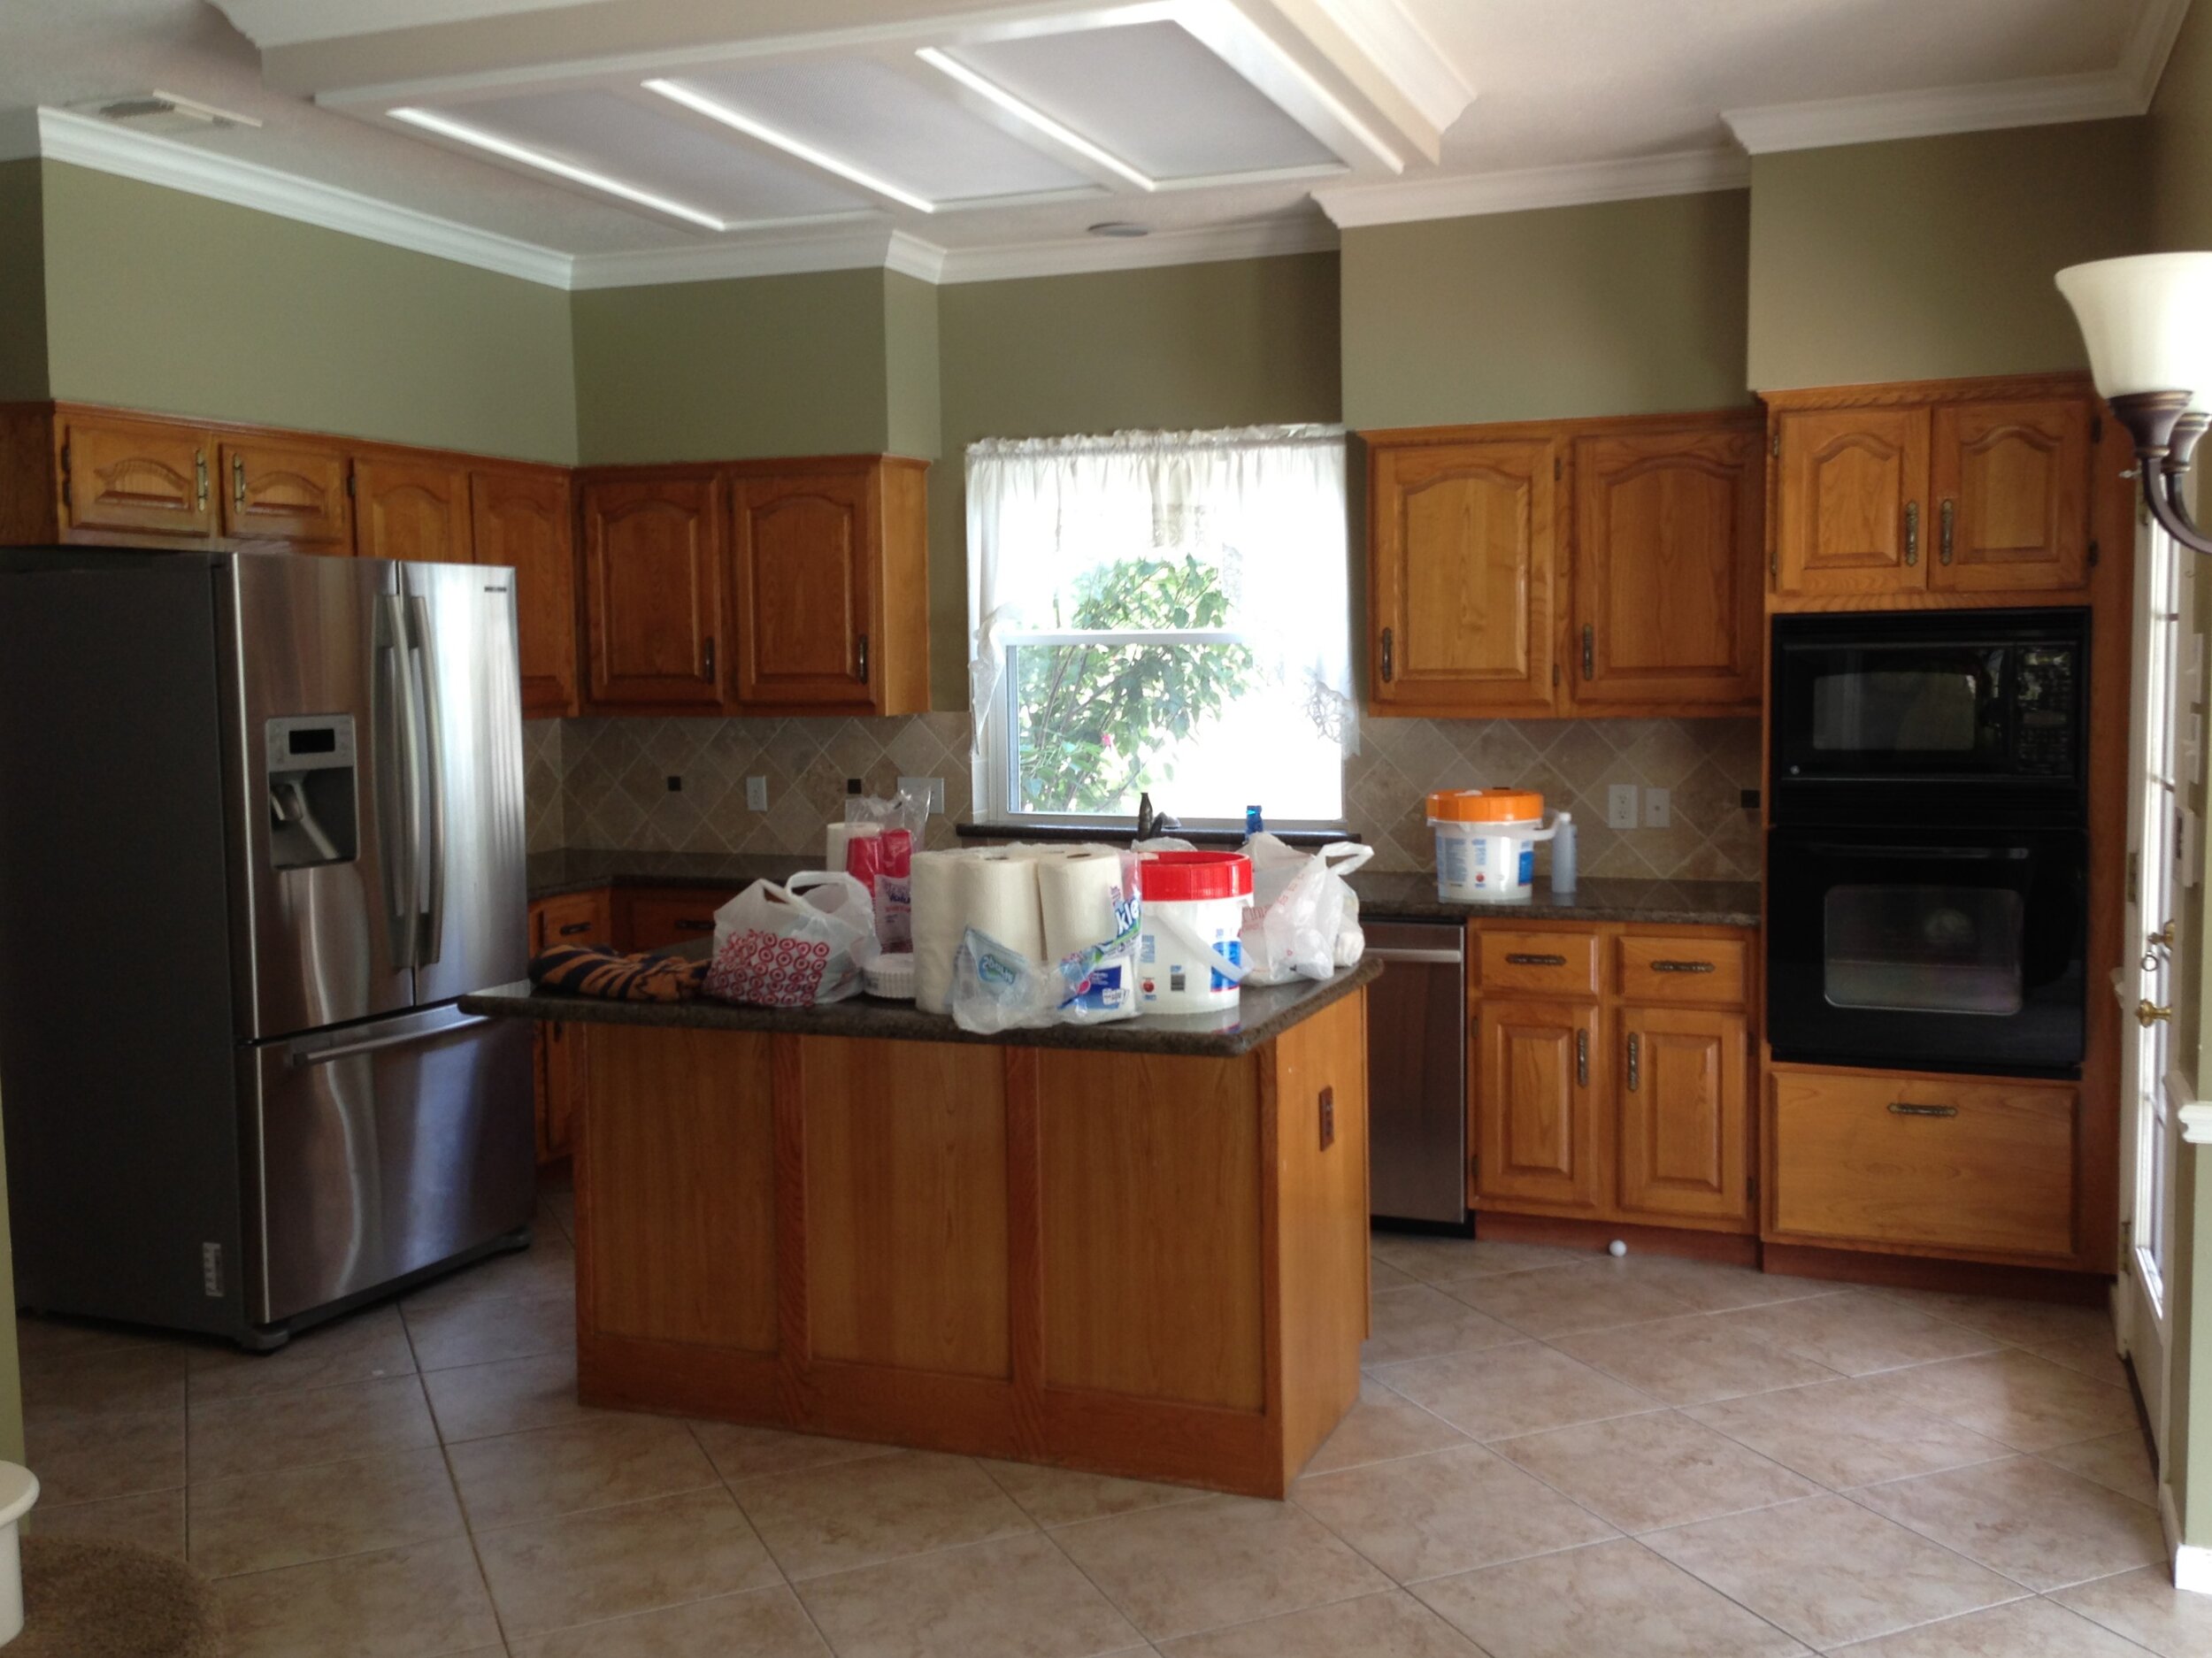 Are Upper Kitchen Cabinets Of Varying Heights In Style Designed